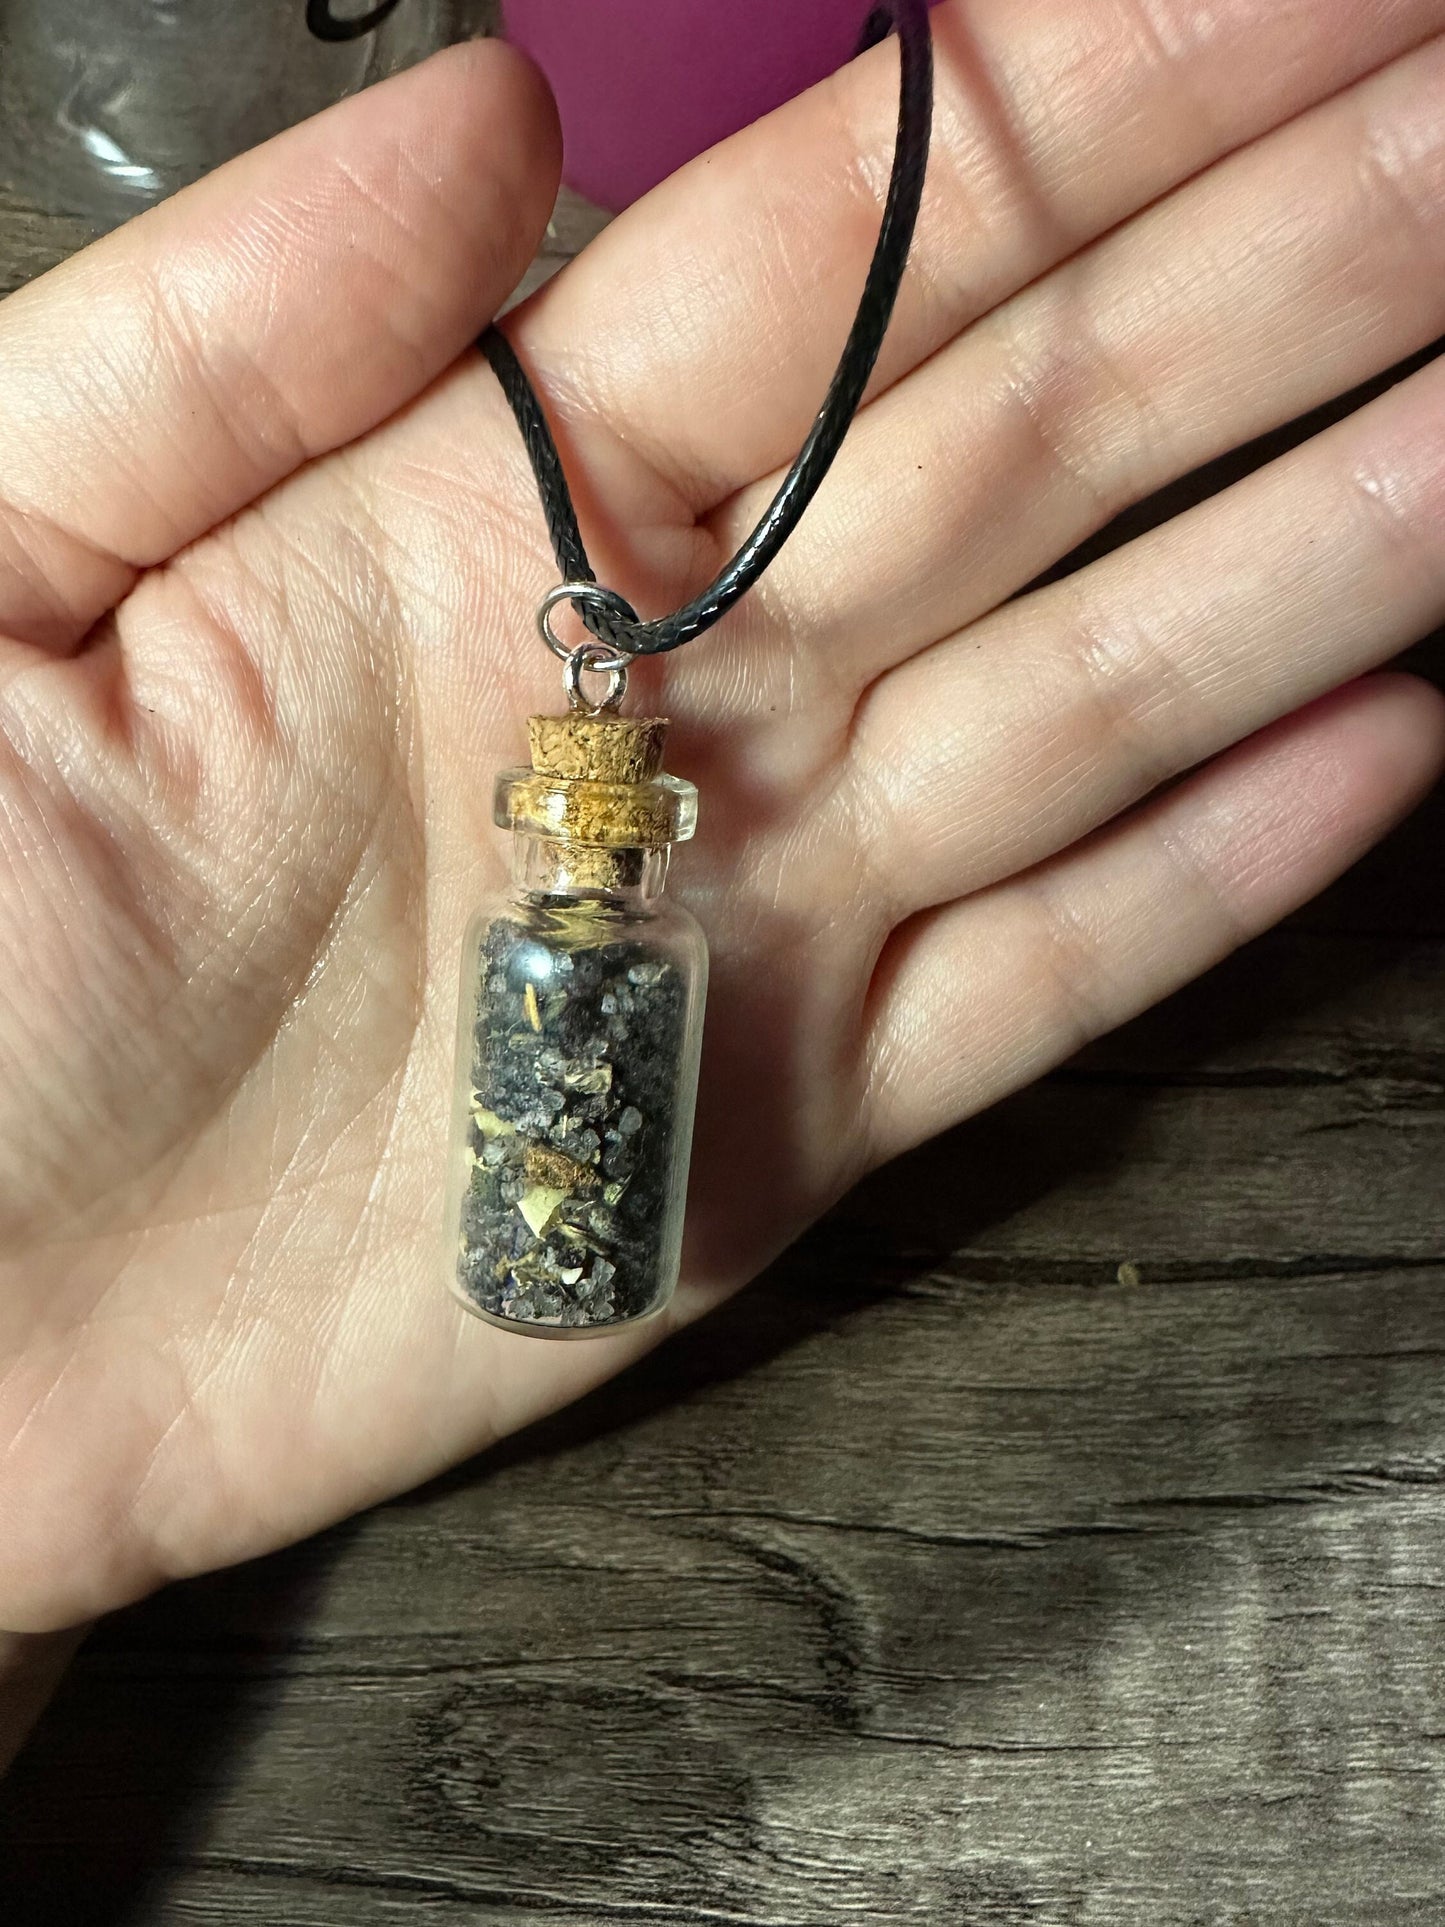 Witches Black Salt Protection Spell Jar Necklace